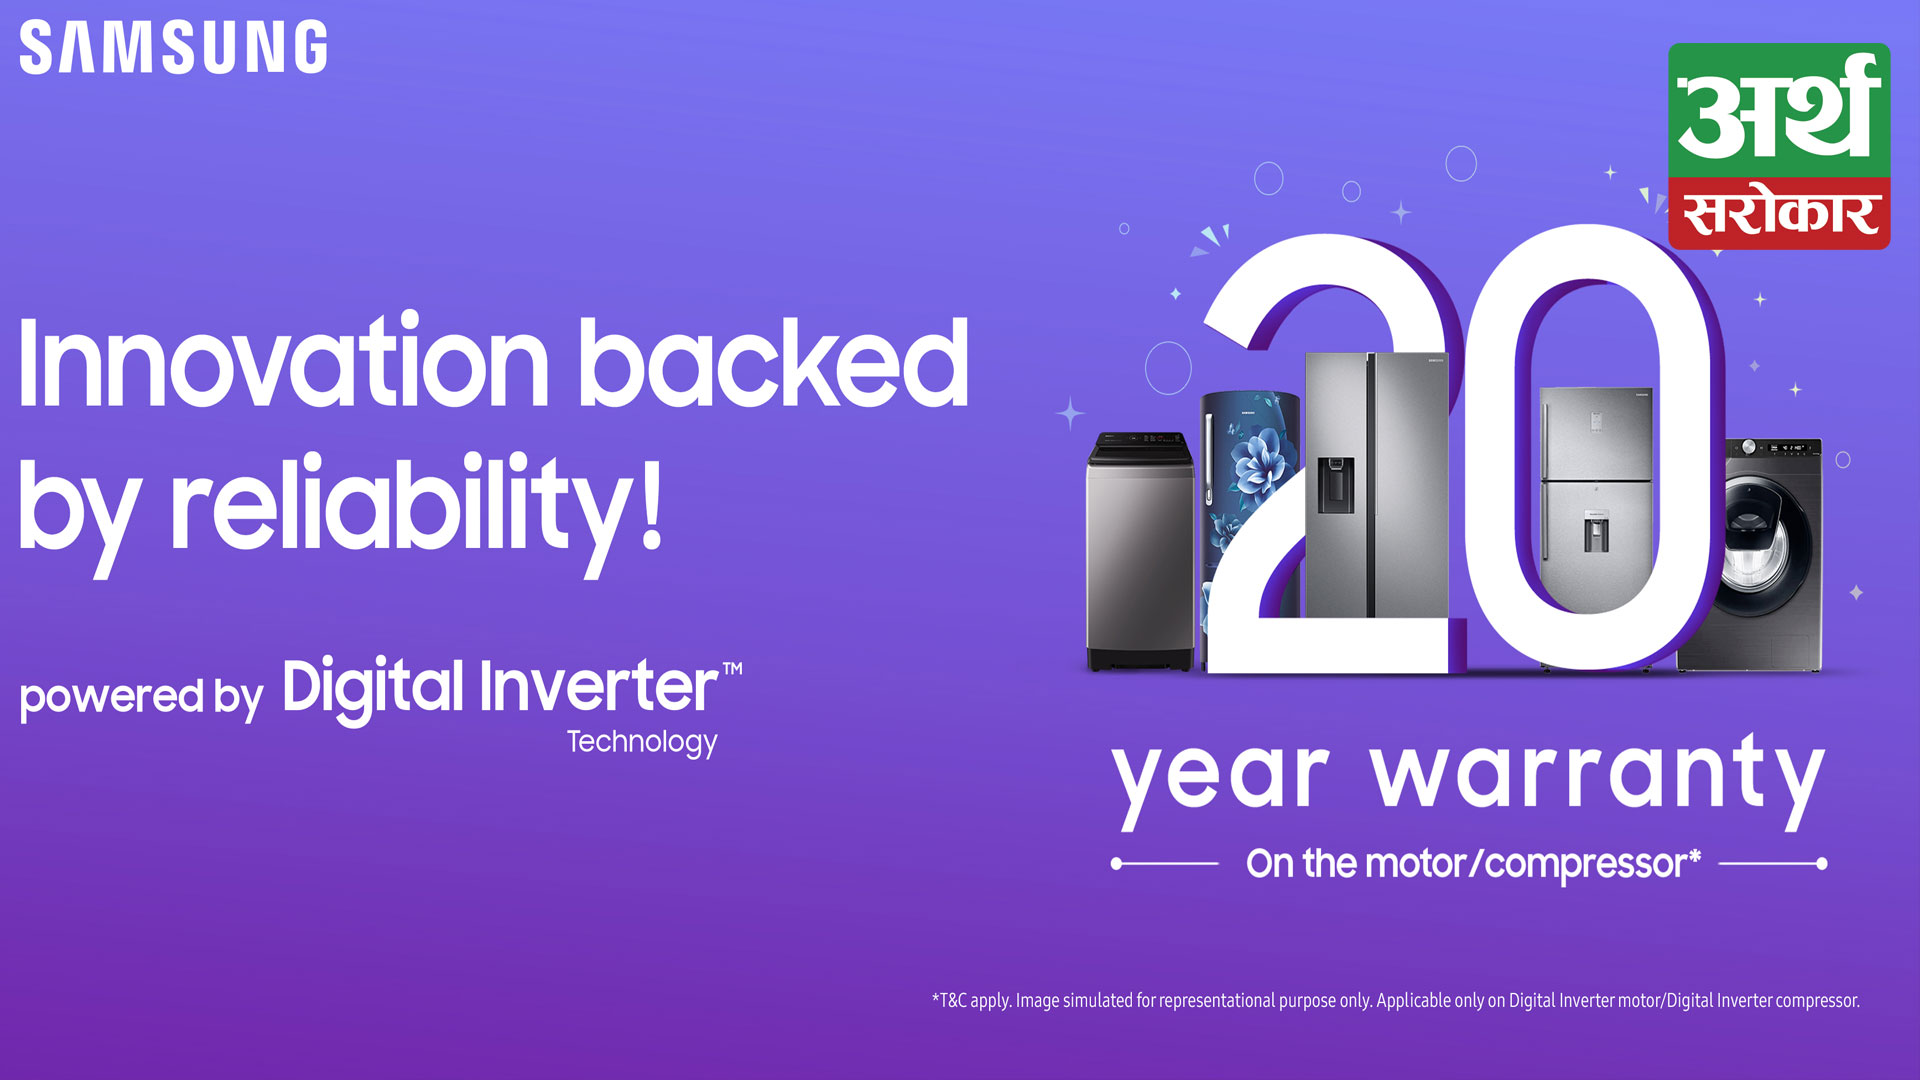 Samsung Offers 20-Year Warranty on its Digital Inverter Motors for Washing Machines & Compressors for Refrigerators